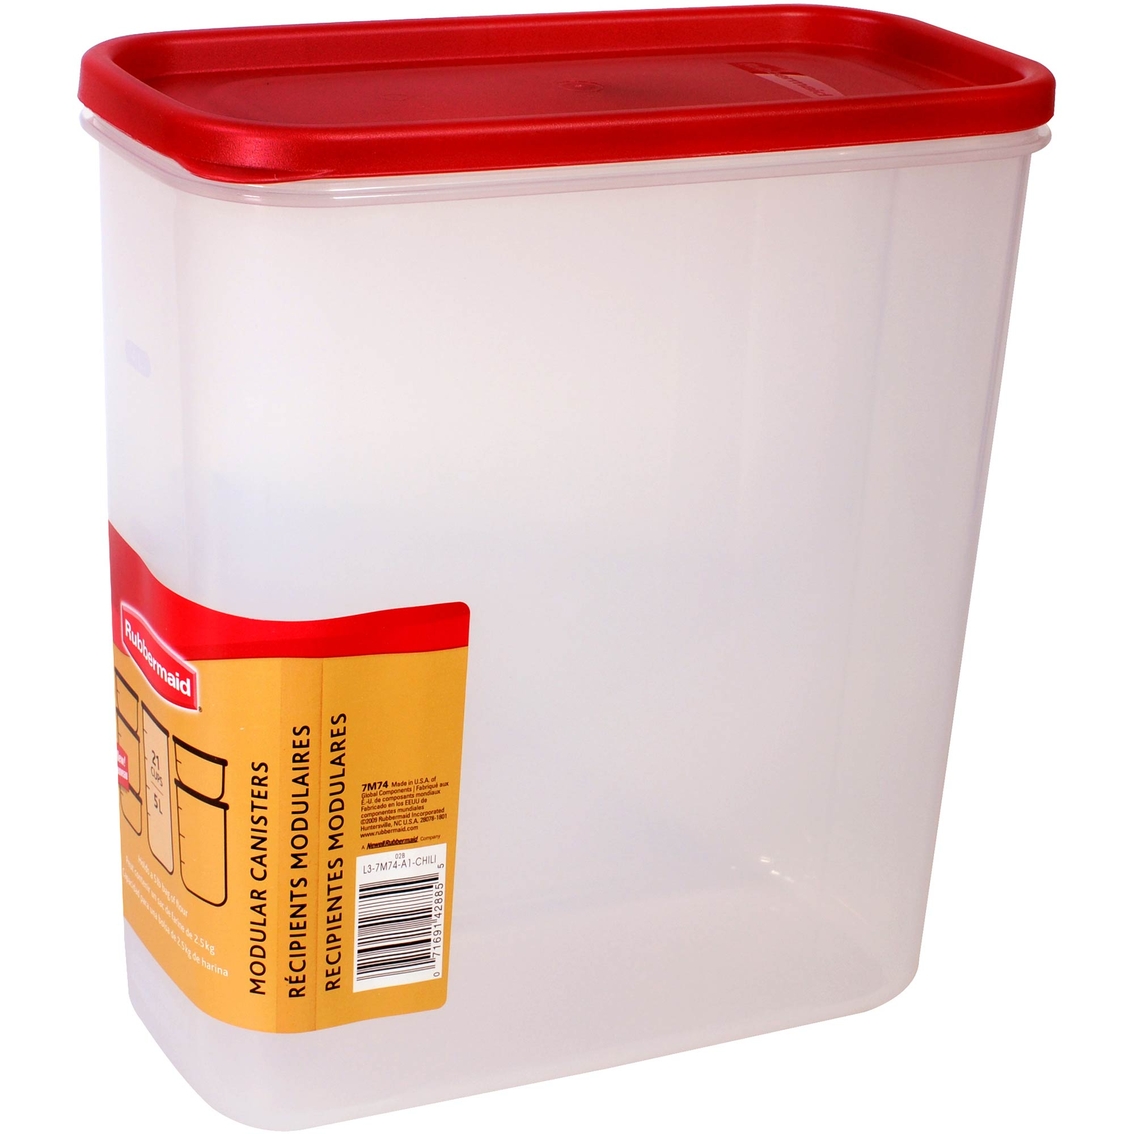 Rubbermaid 21 Cup Dry Food Container, Food Storage